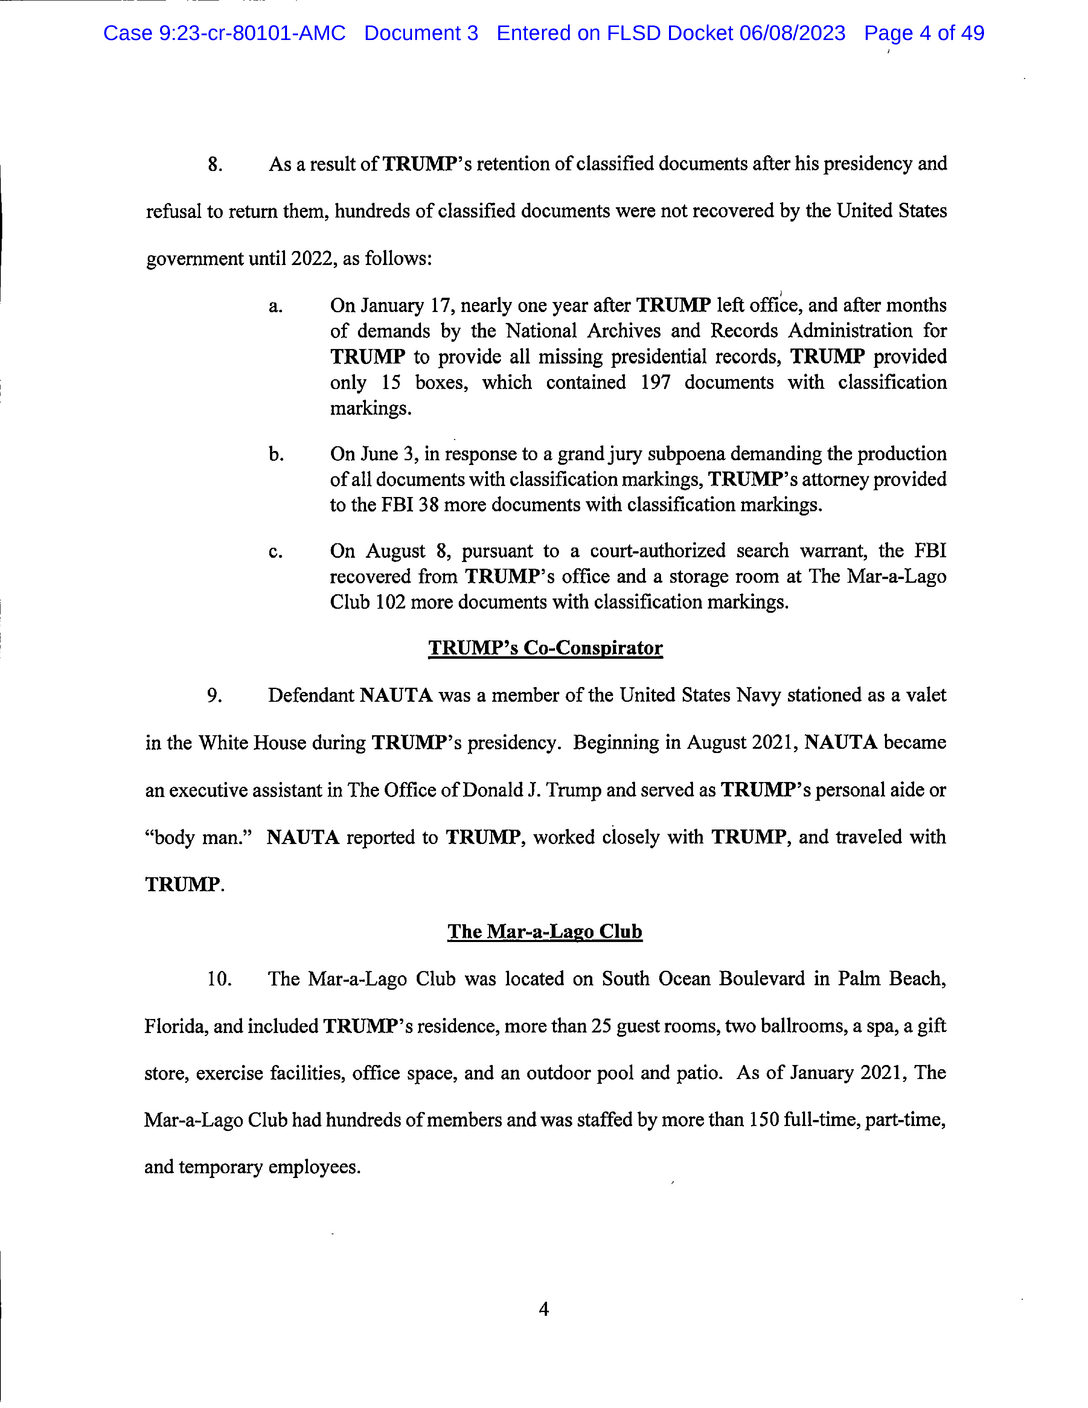 Page 4 of Donald Trump Classified Documents Indictment PDF document.